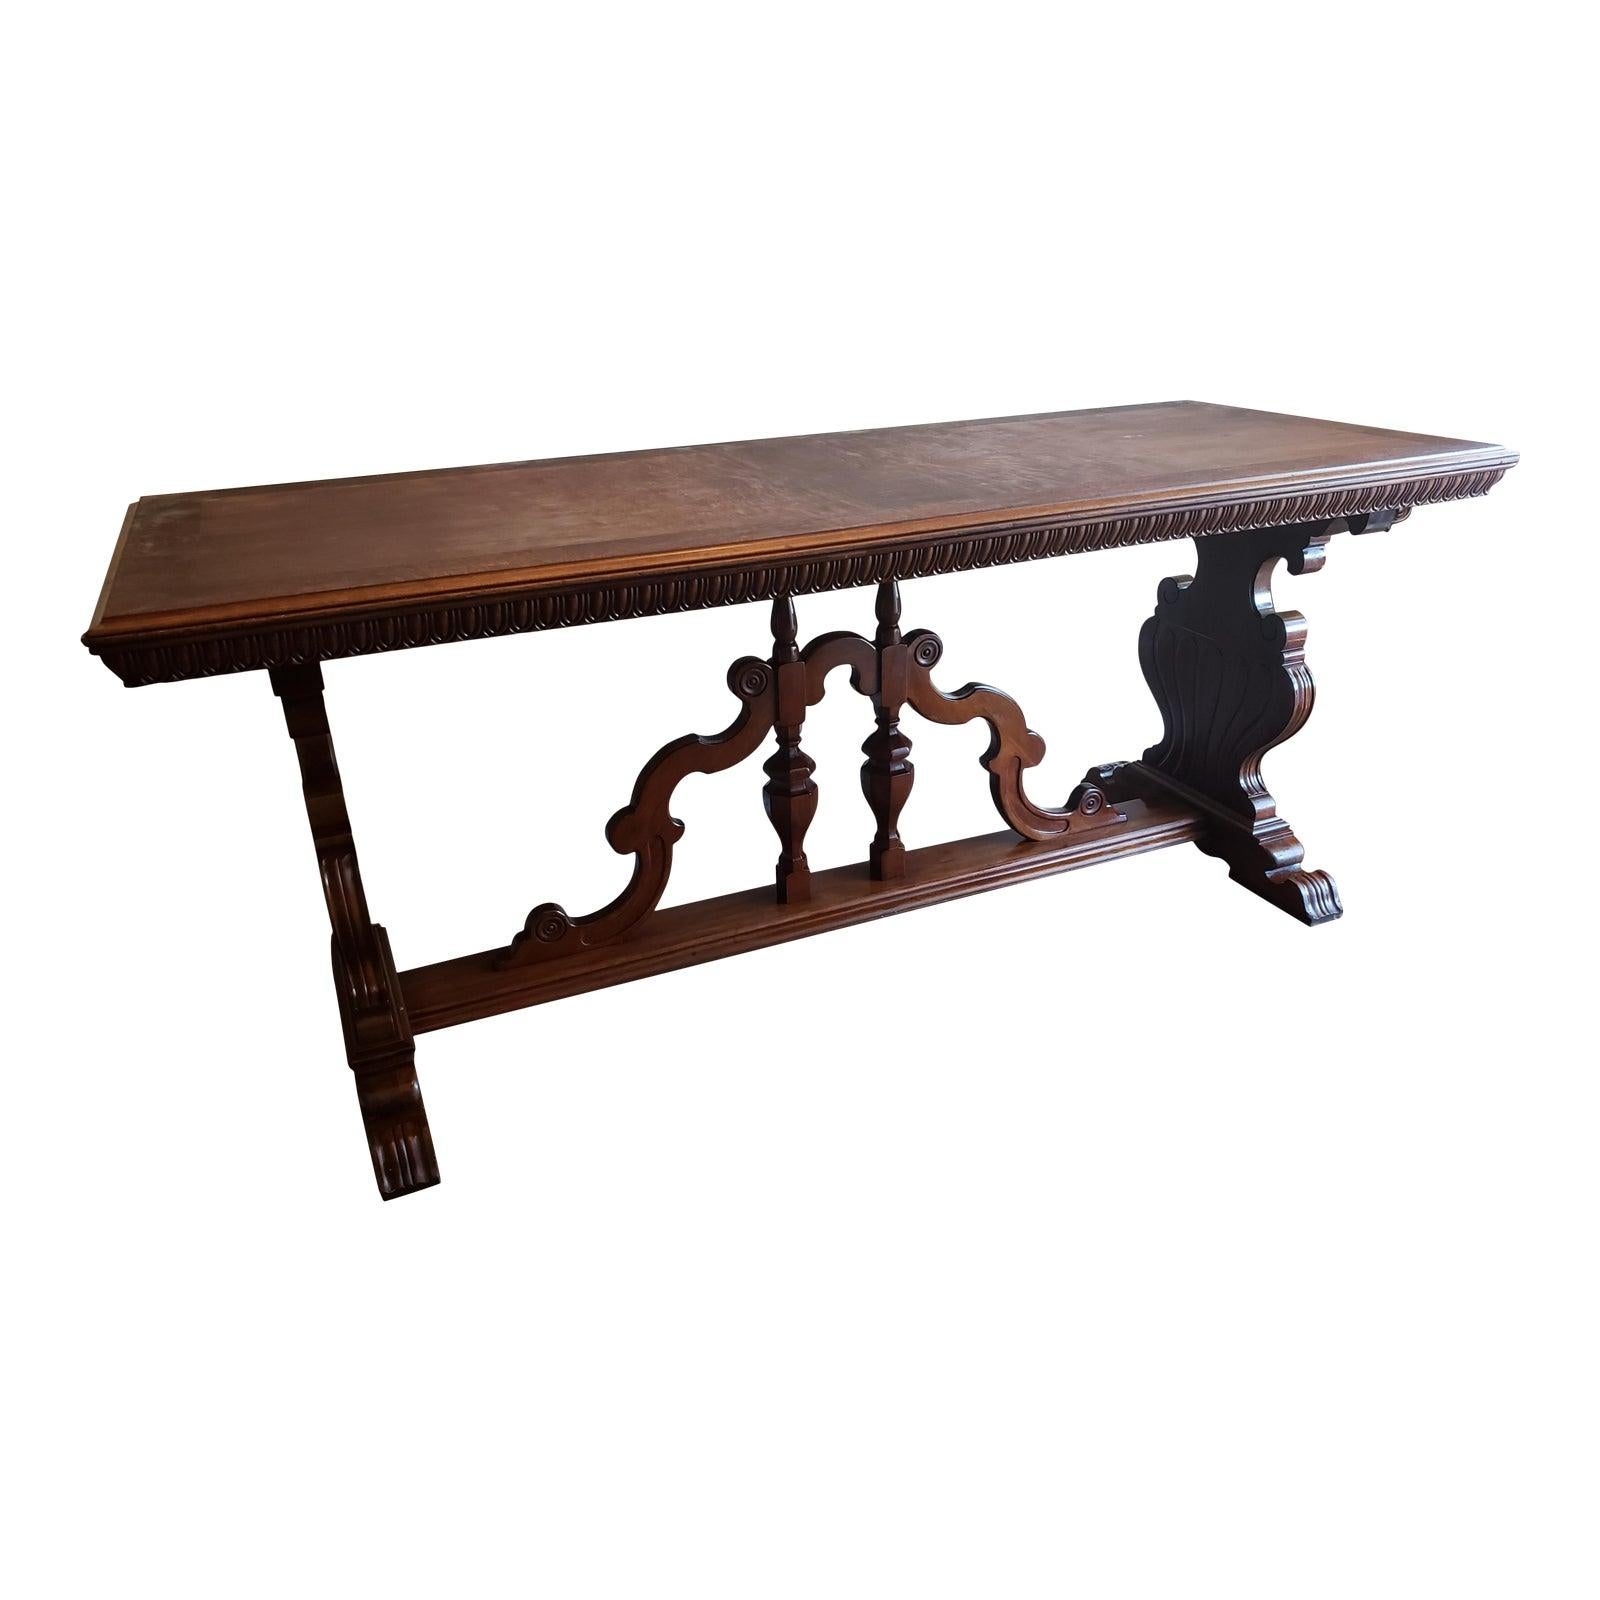 1910s Imperial Grand Rapids Carved Solid Walnut Trestle Table For Sale